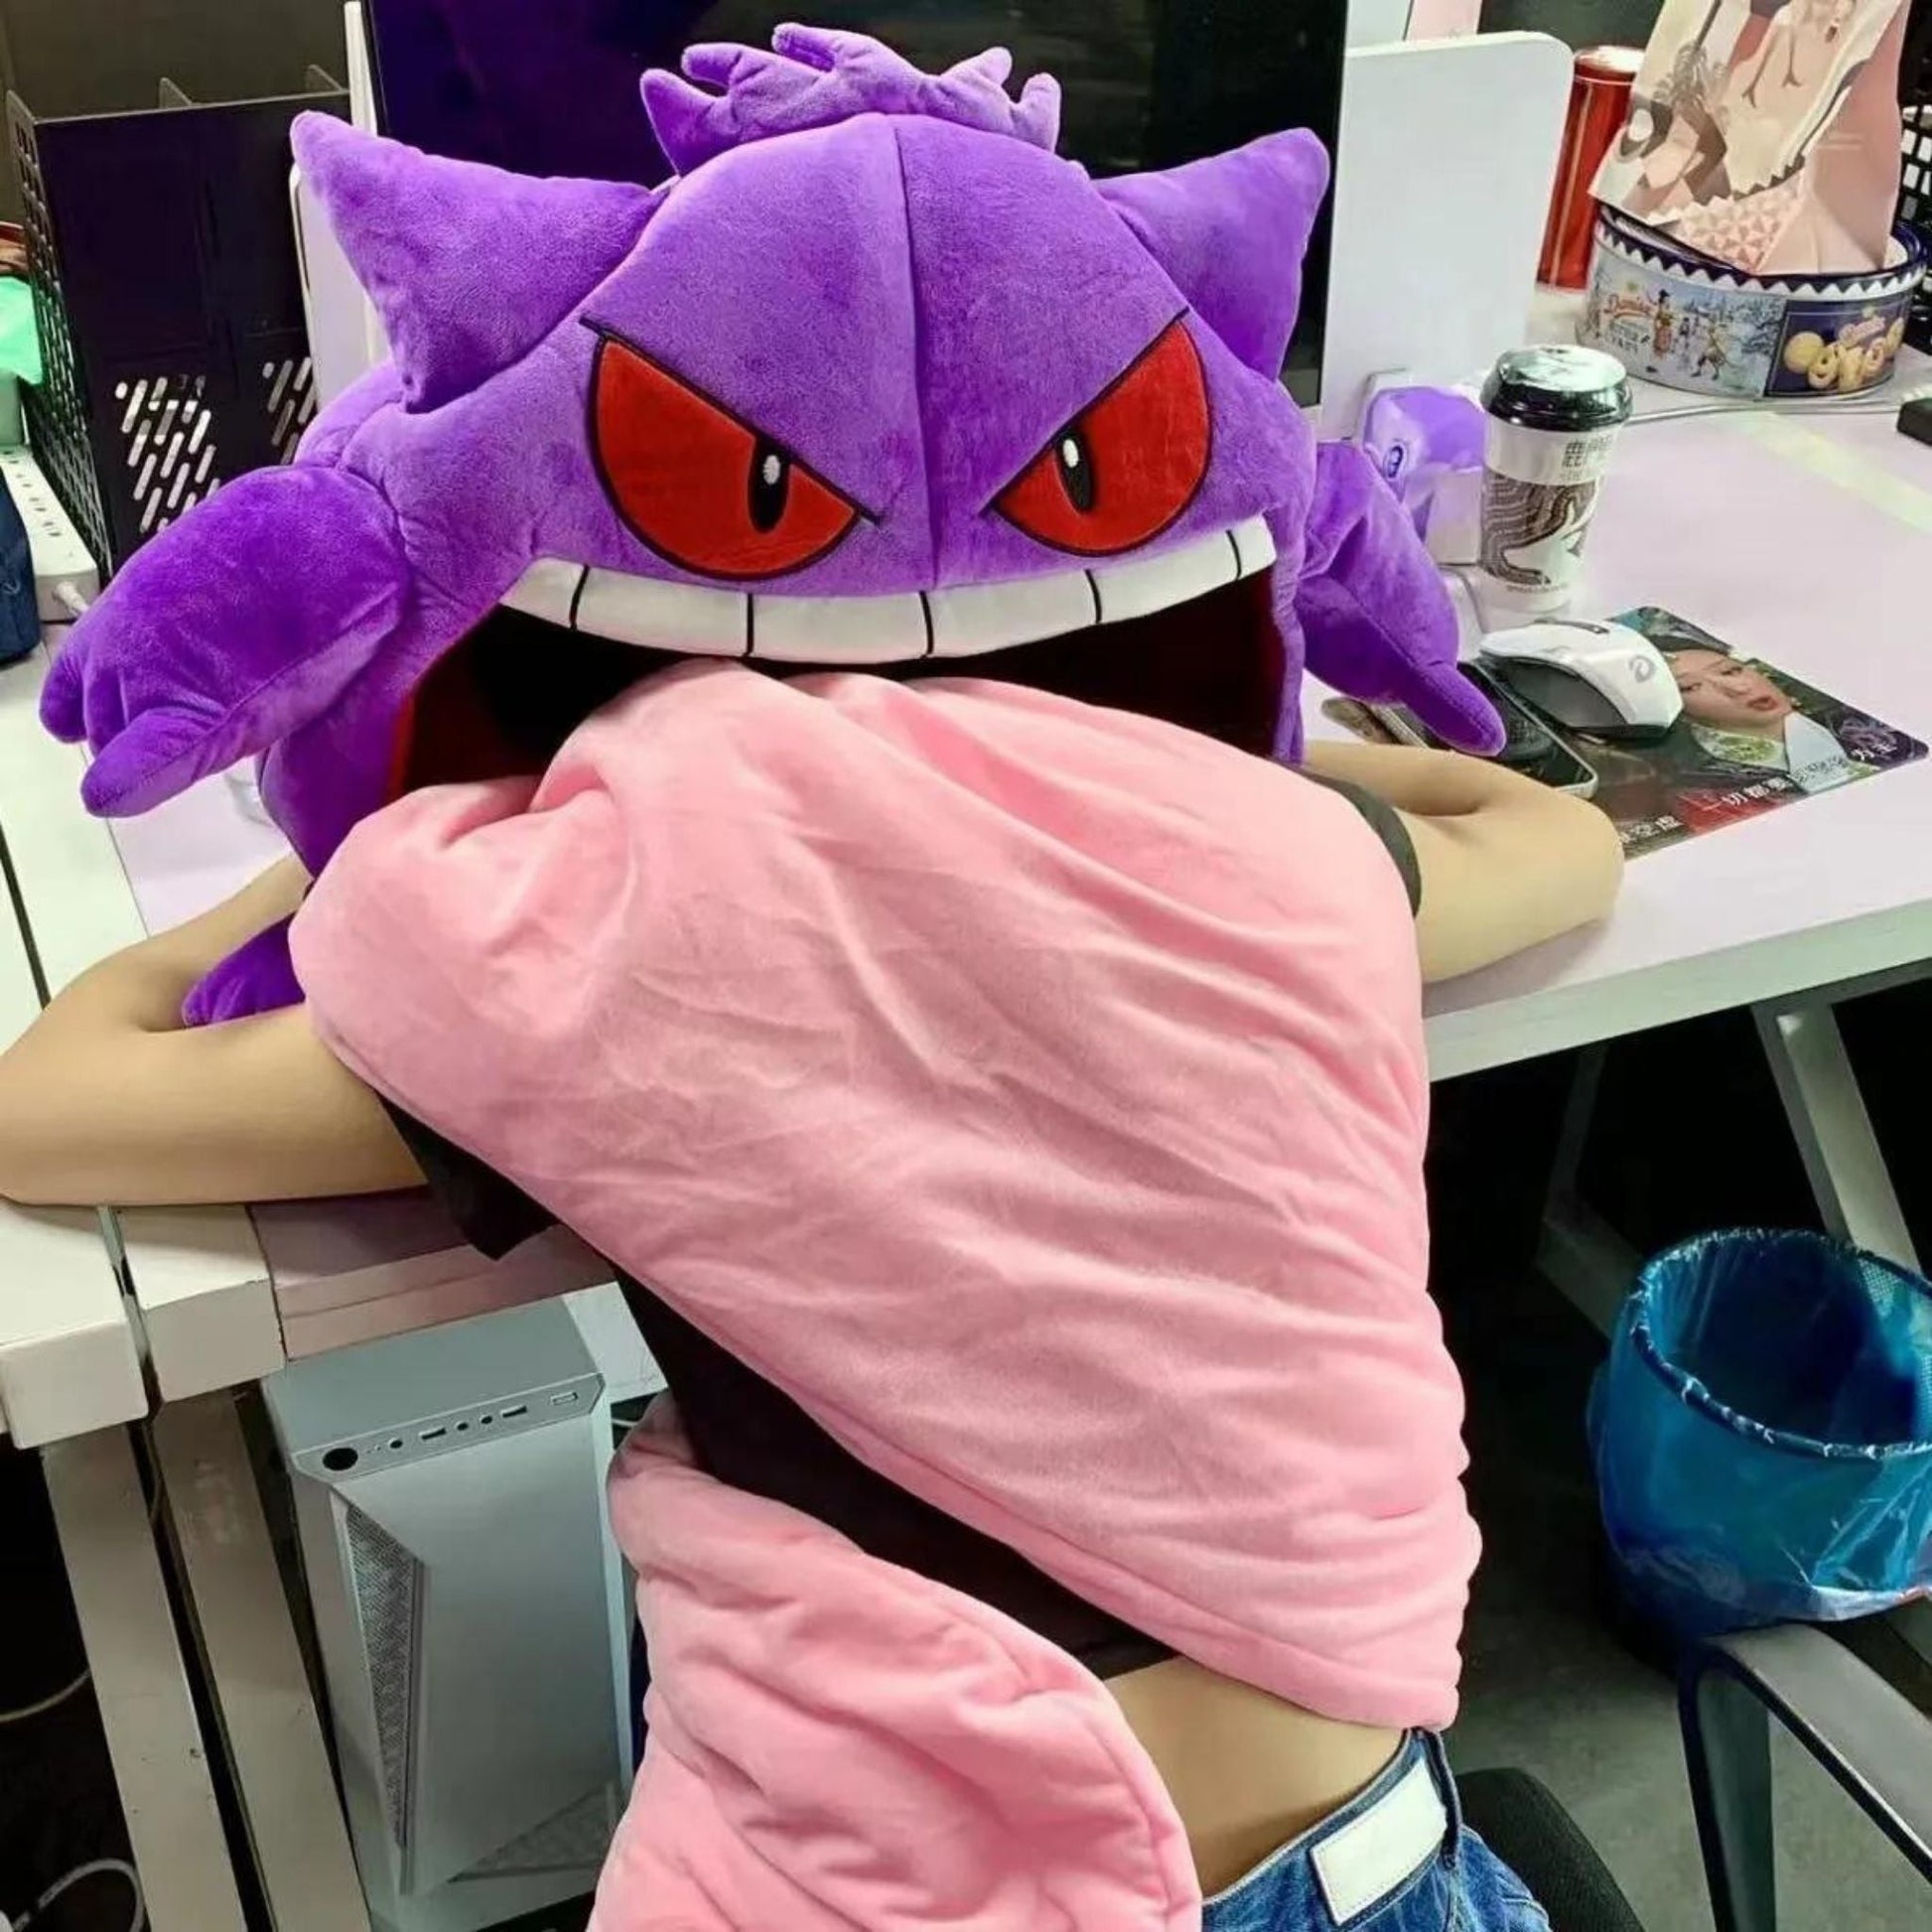 Sleeping - Gengar Tongue Pillow Blanket Sleeping Pod For Afternoon Naps. Portable design for travel, work and on the go napping. Perfect gift for Pokémon fans.